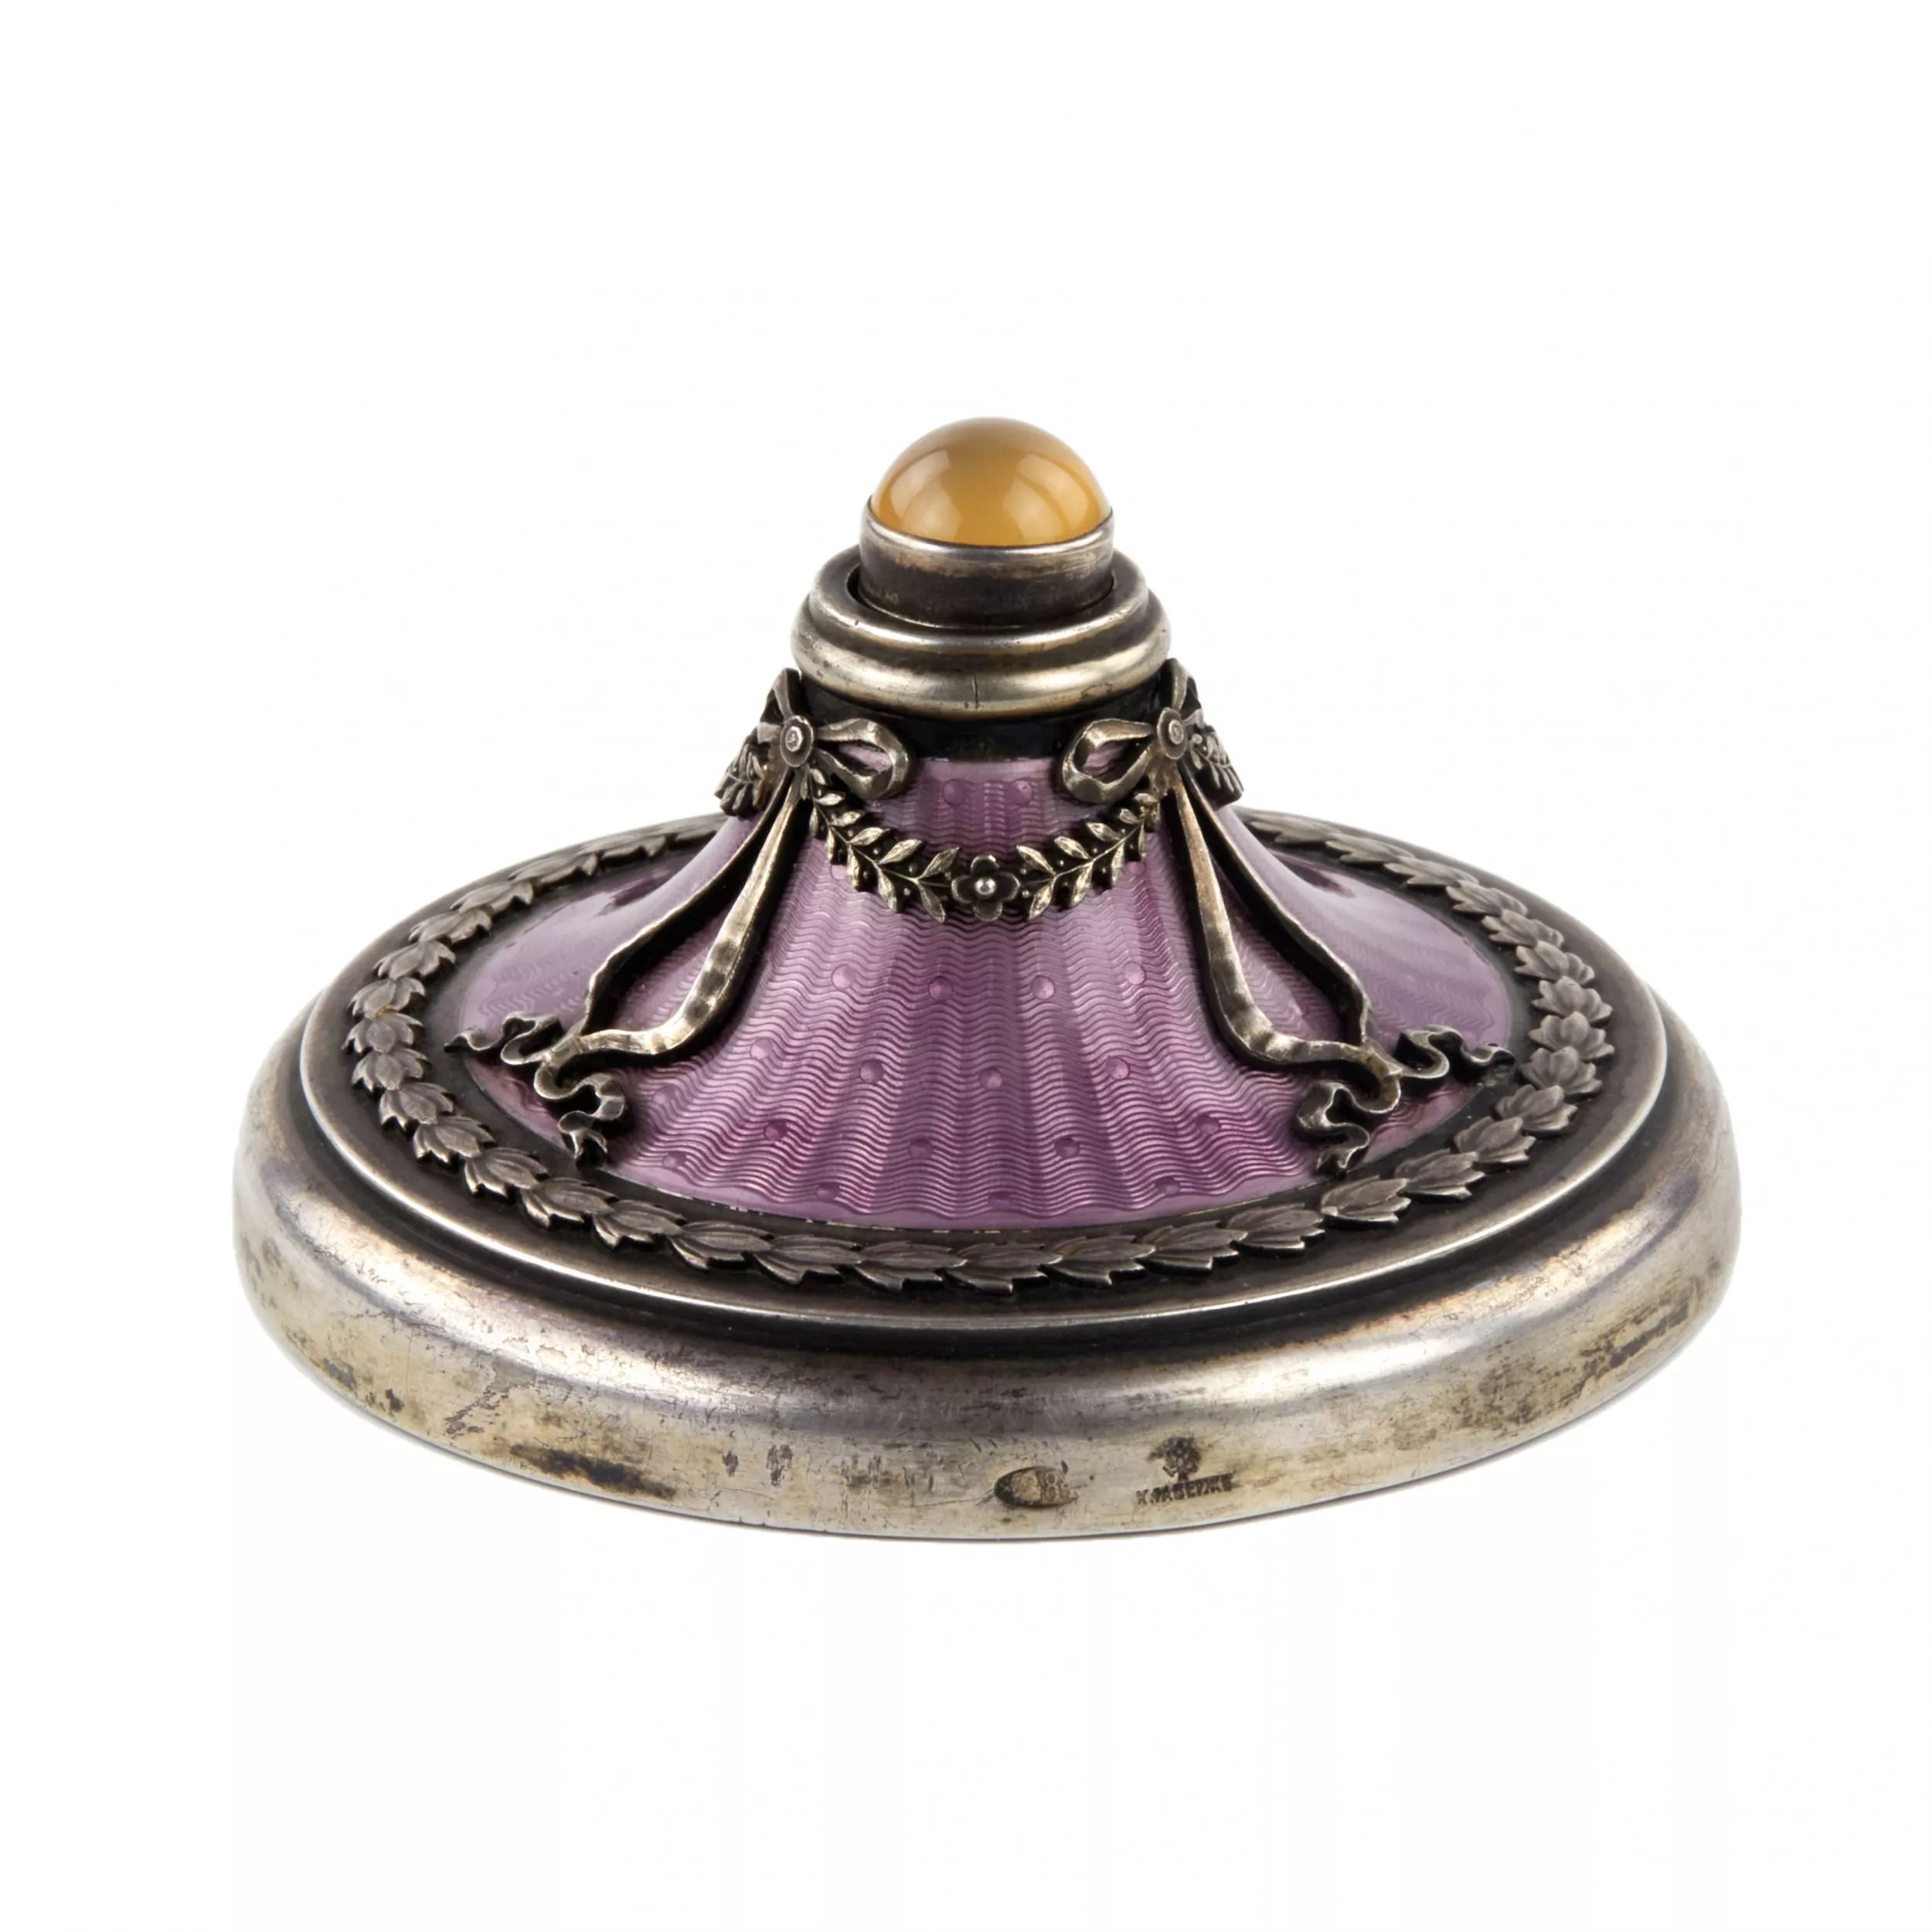 K-Faberge-Silver-table-bell-with-guilloche-enamel-